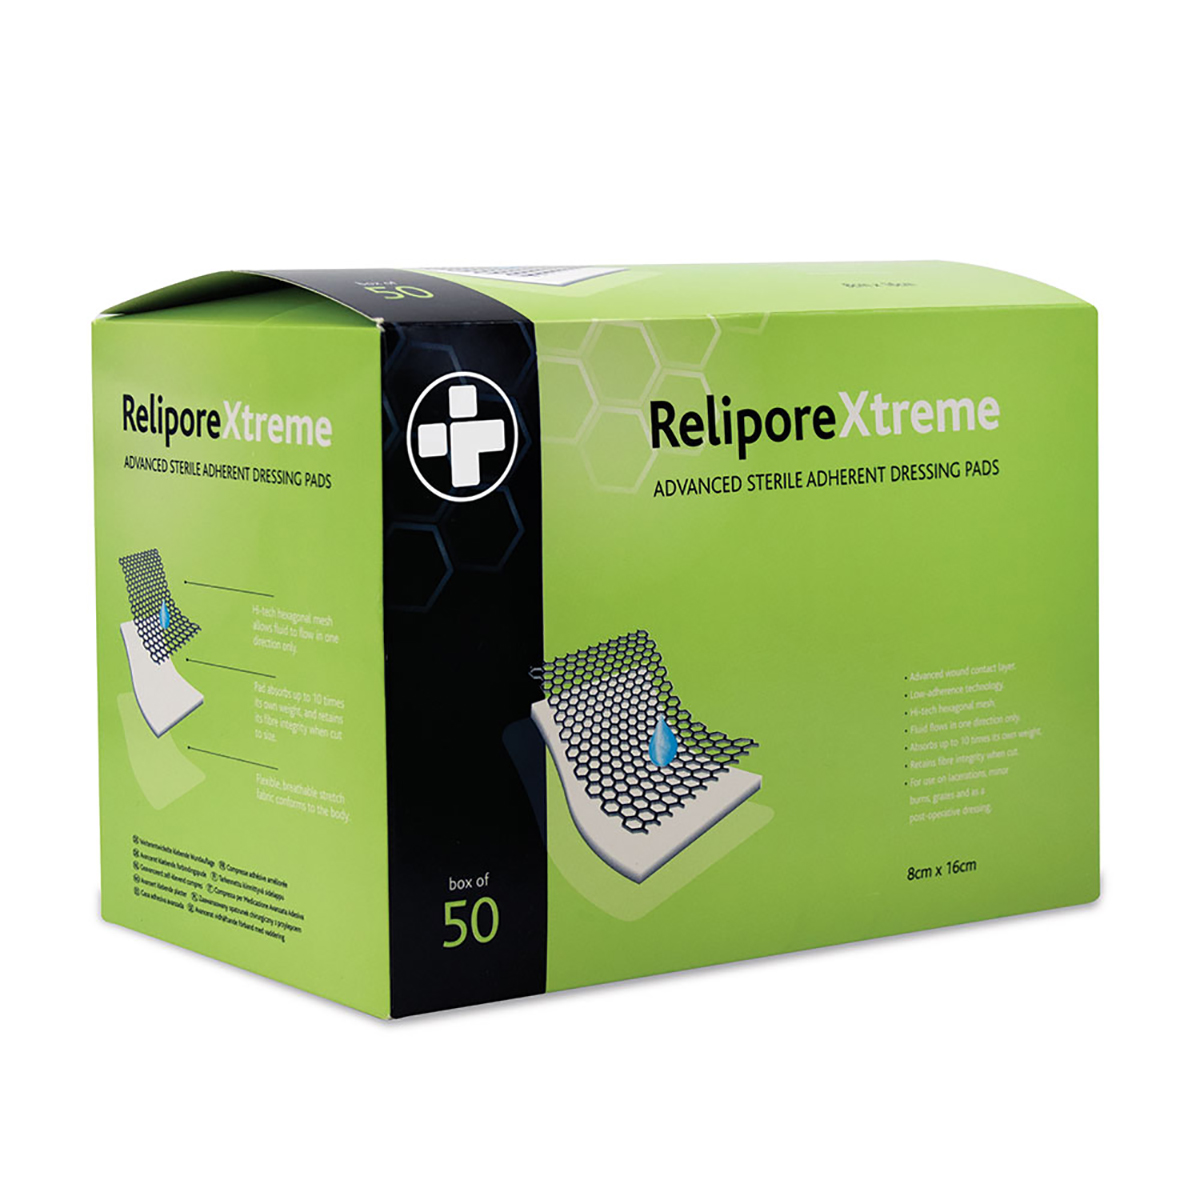 Pack of 50 8cm x 16 cm Reliporextreme Dressing Pad